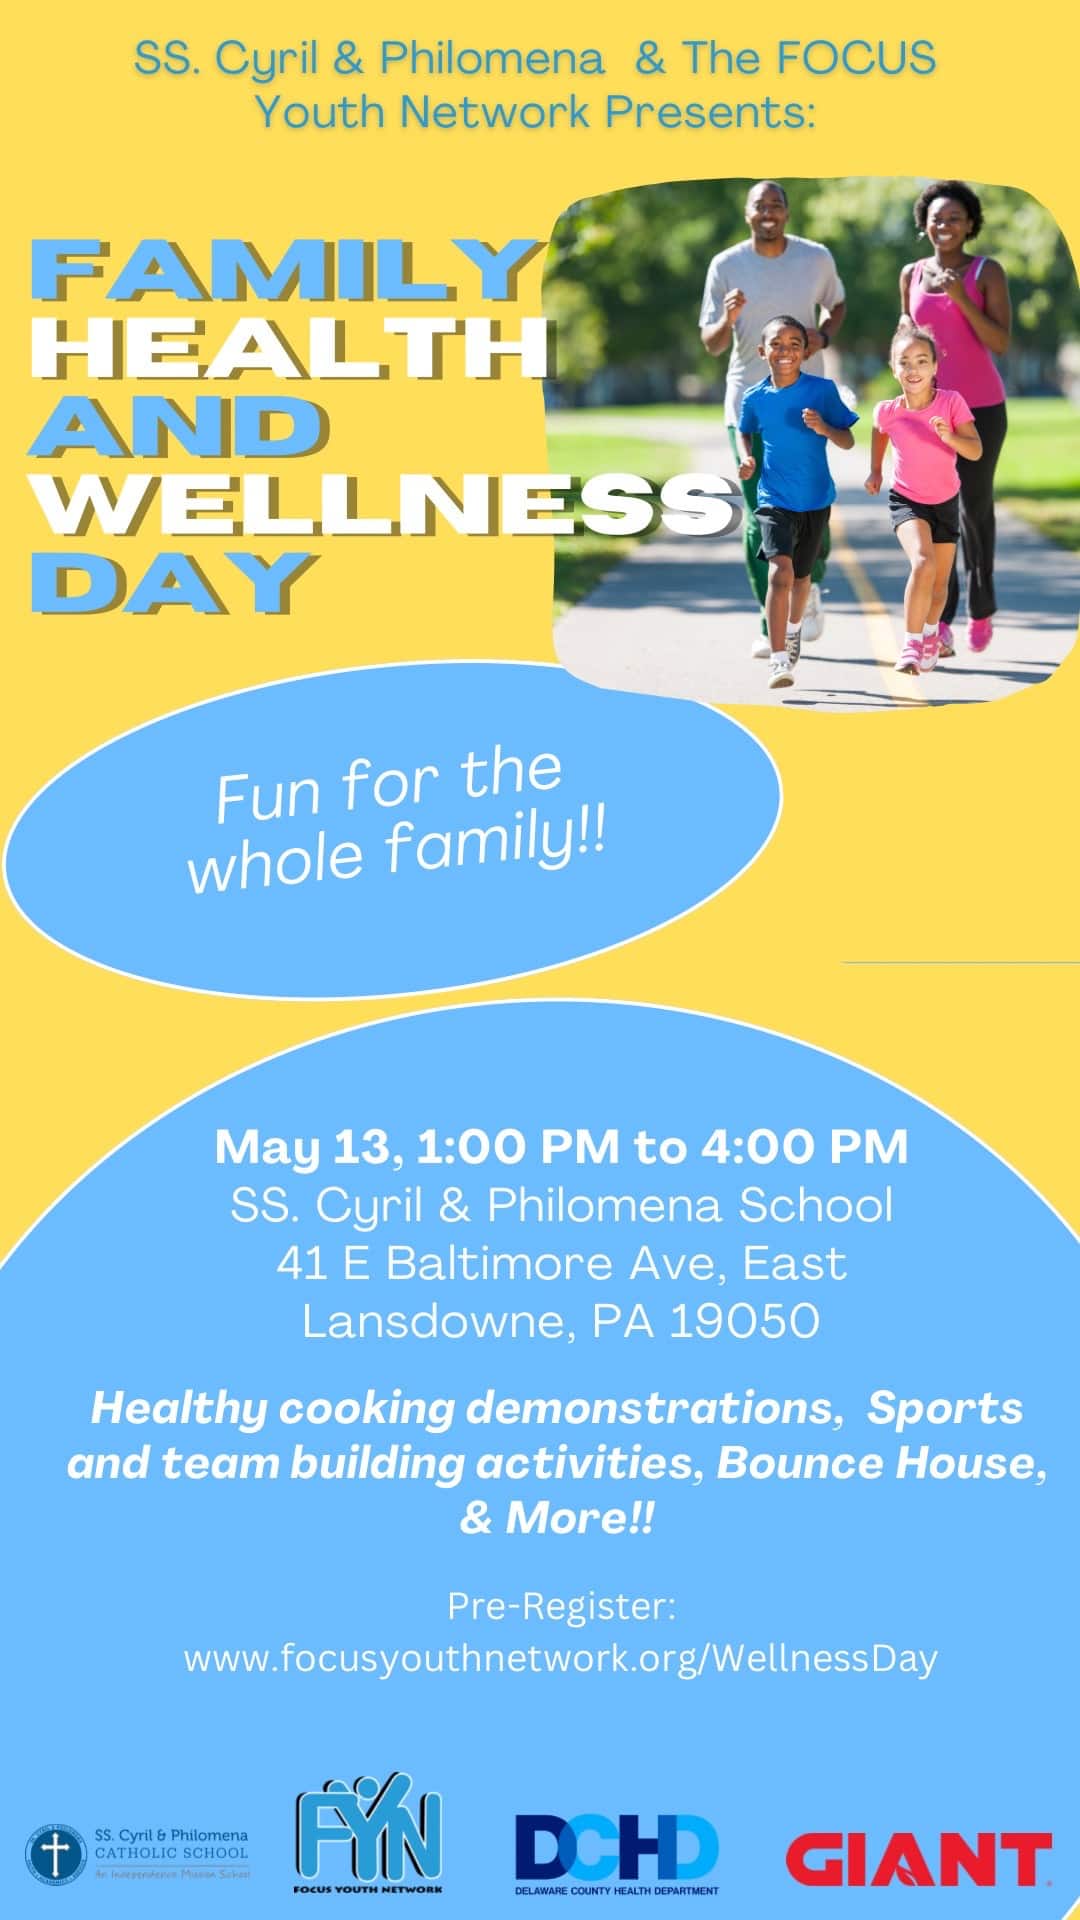 Flyer about Family Health and Wellness Day